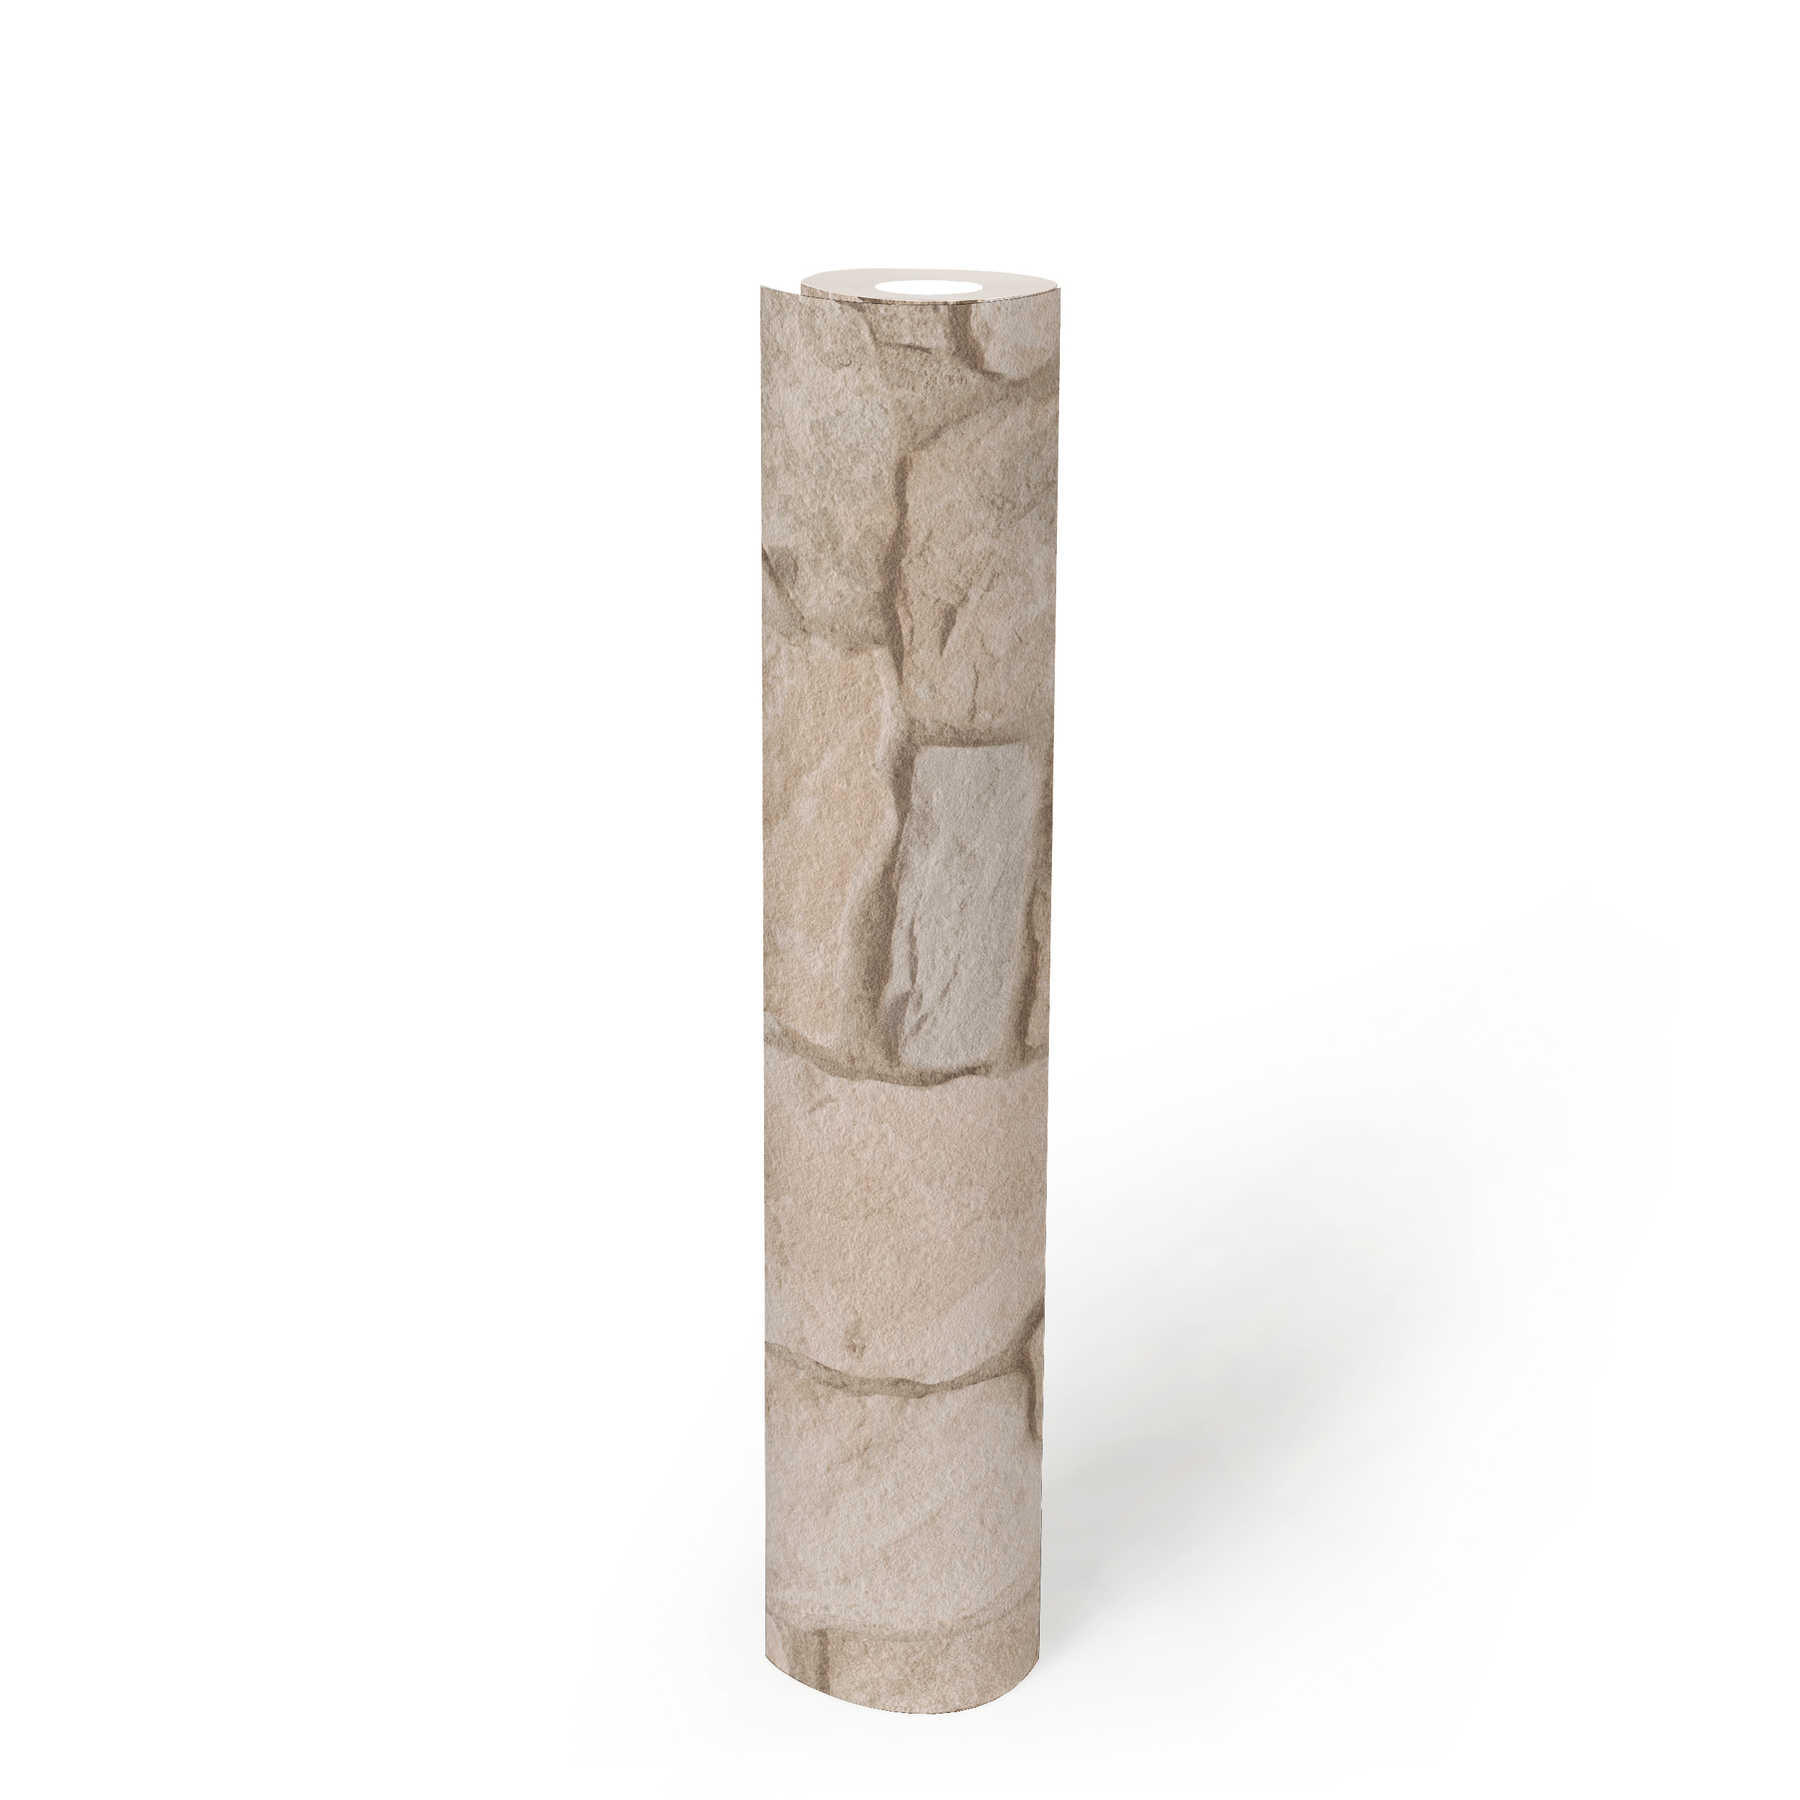             Stone wallpaper with 3D effect and sandstone masonry - beige, brown
        